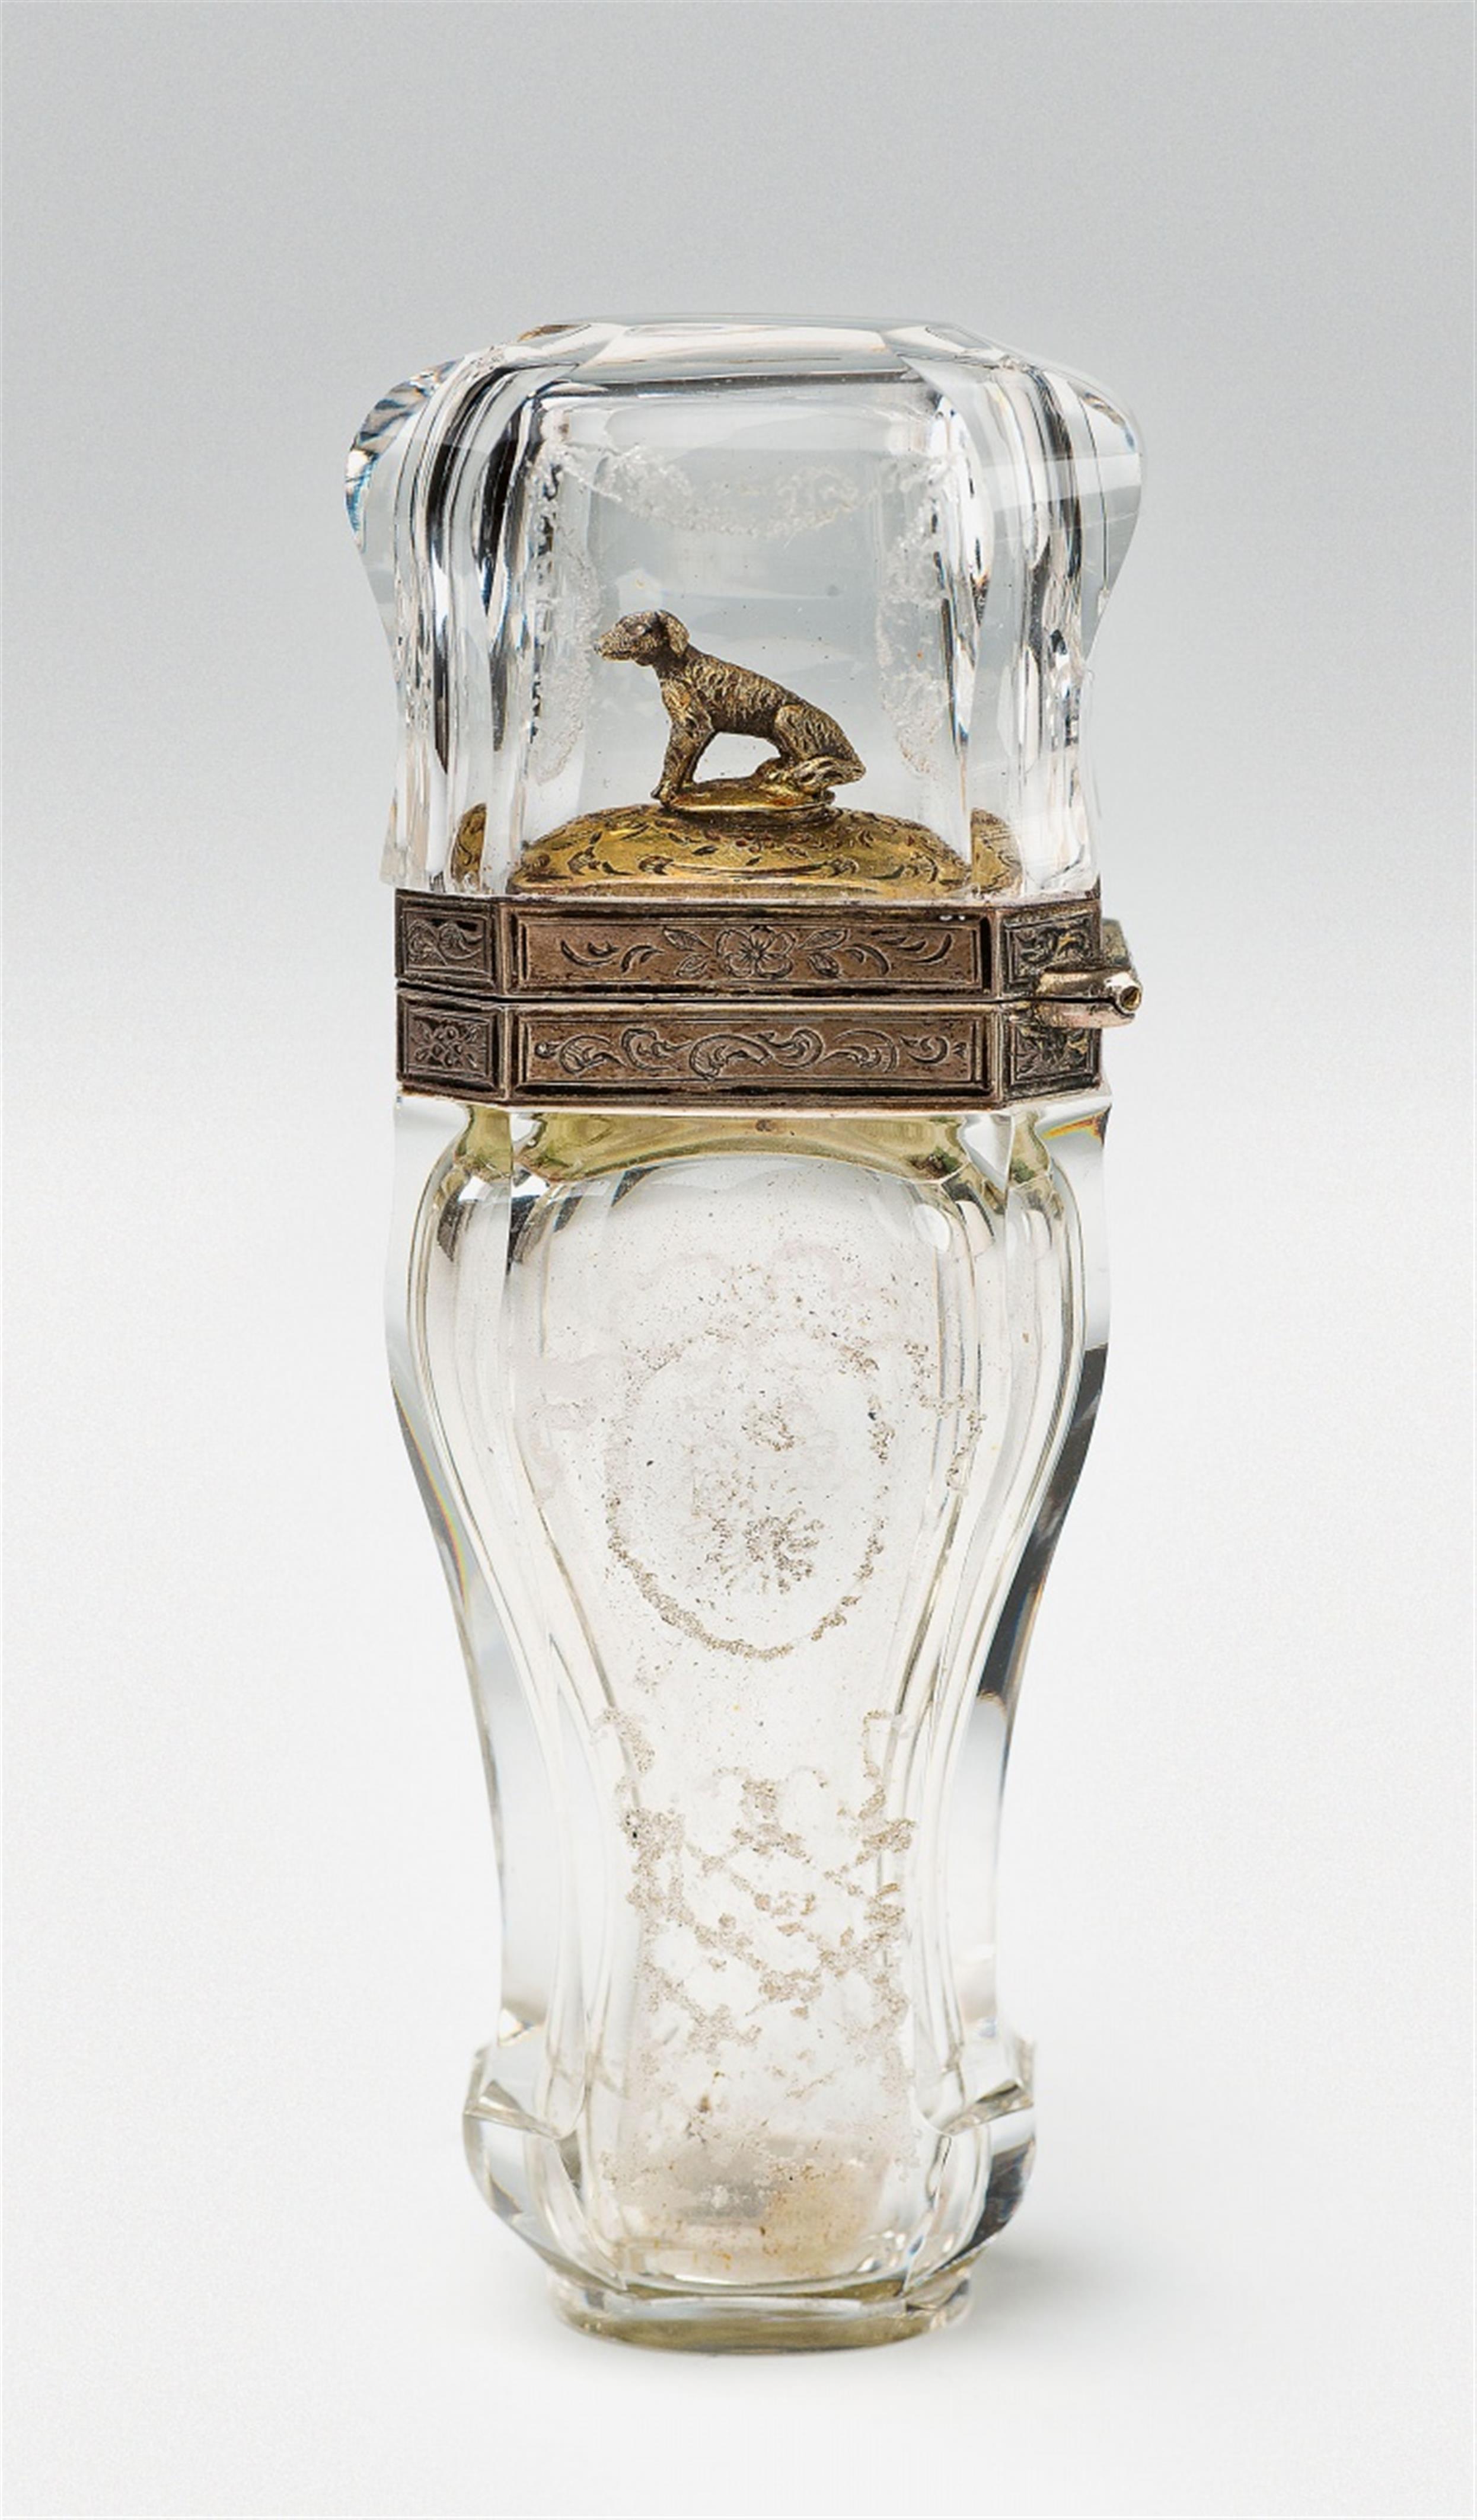 A Parisian vermeil mounted rock crystal bottle with a seated dog - image-1